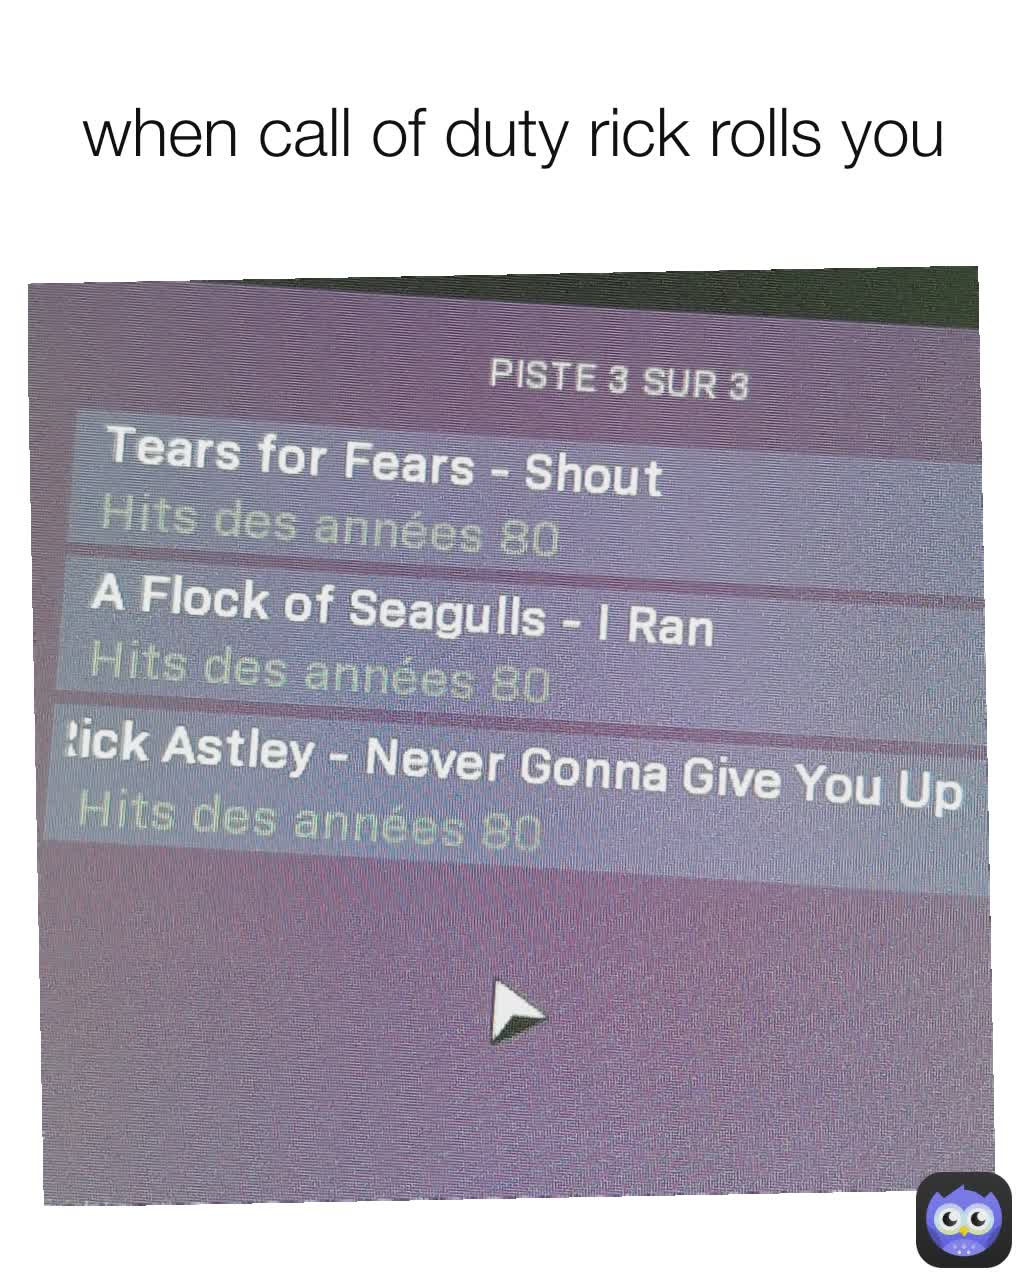 when call of duty rick rolls you